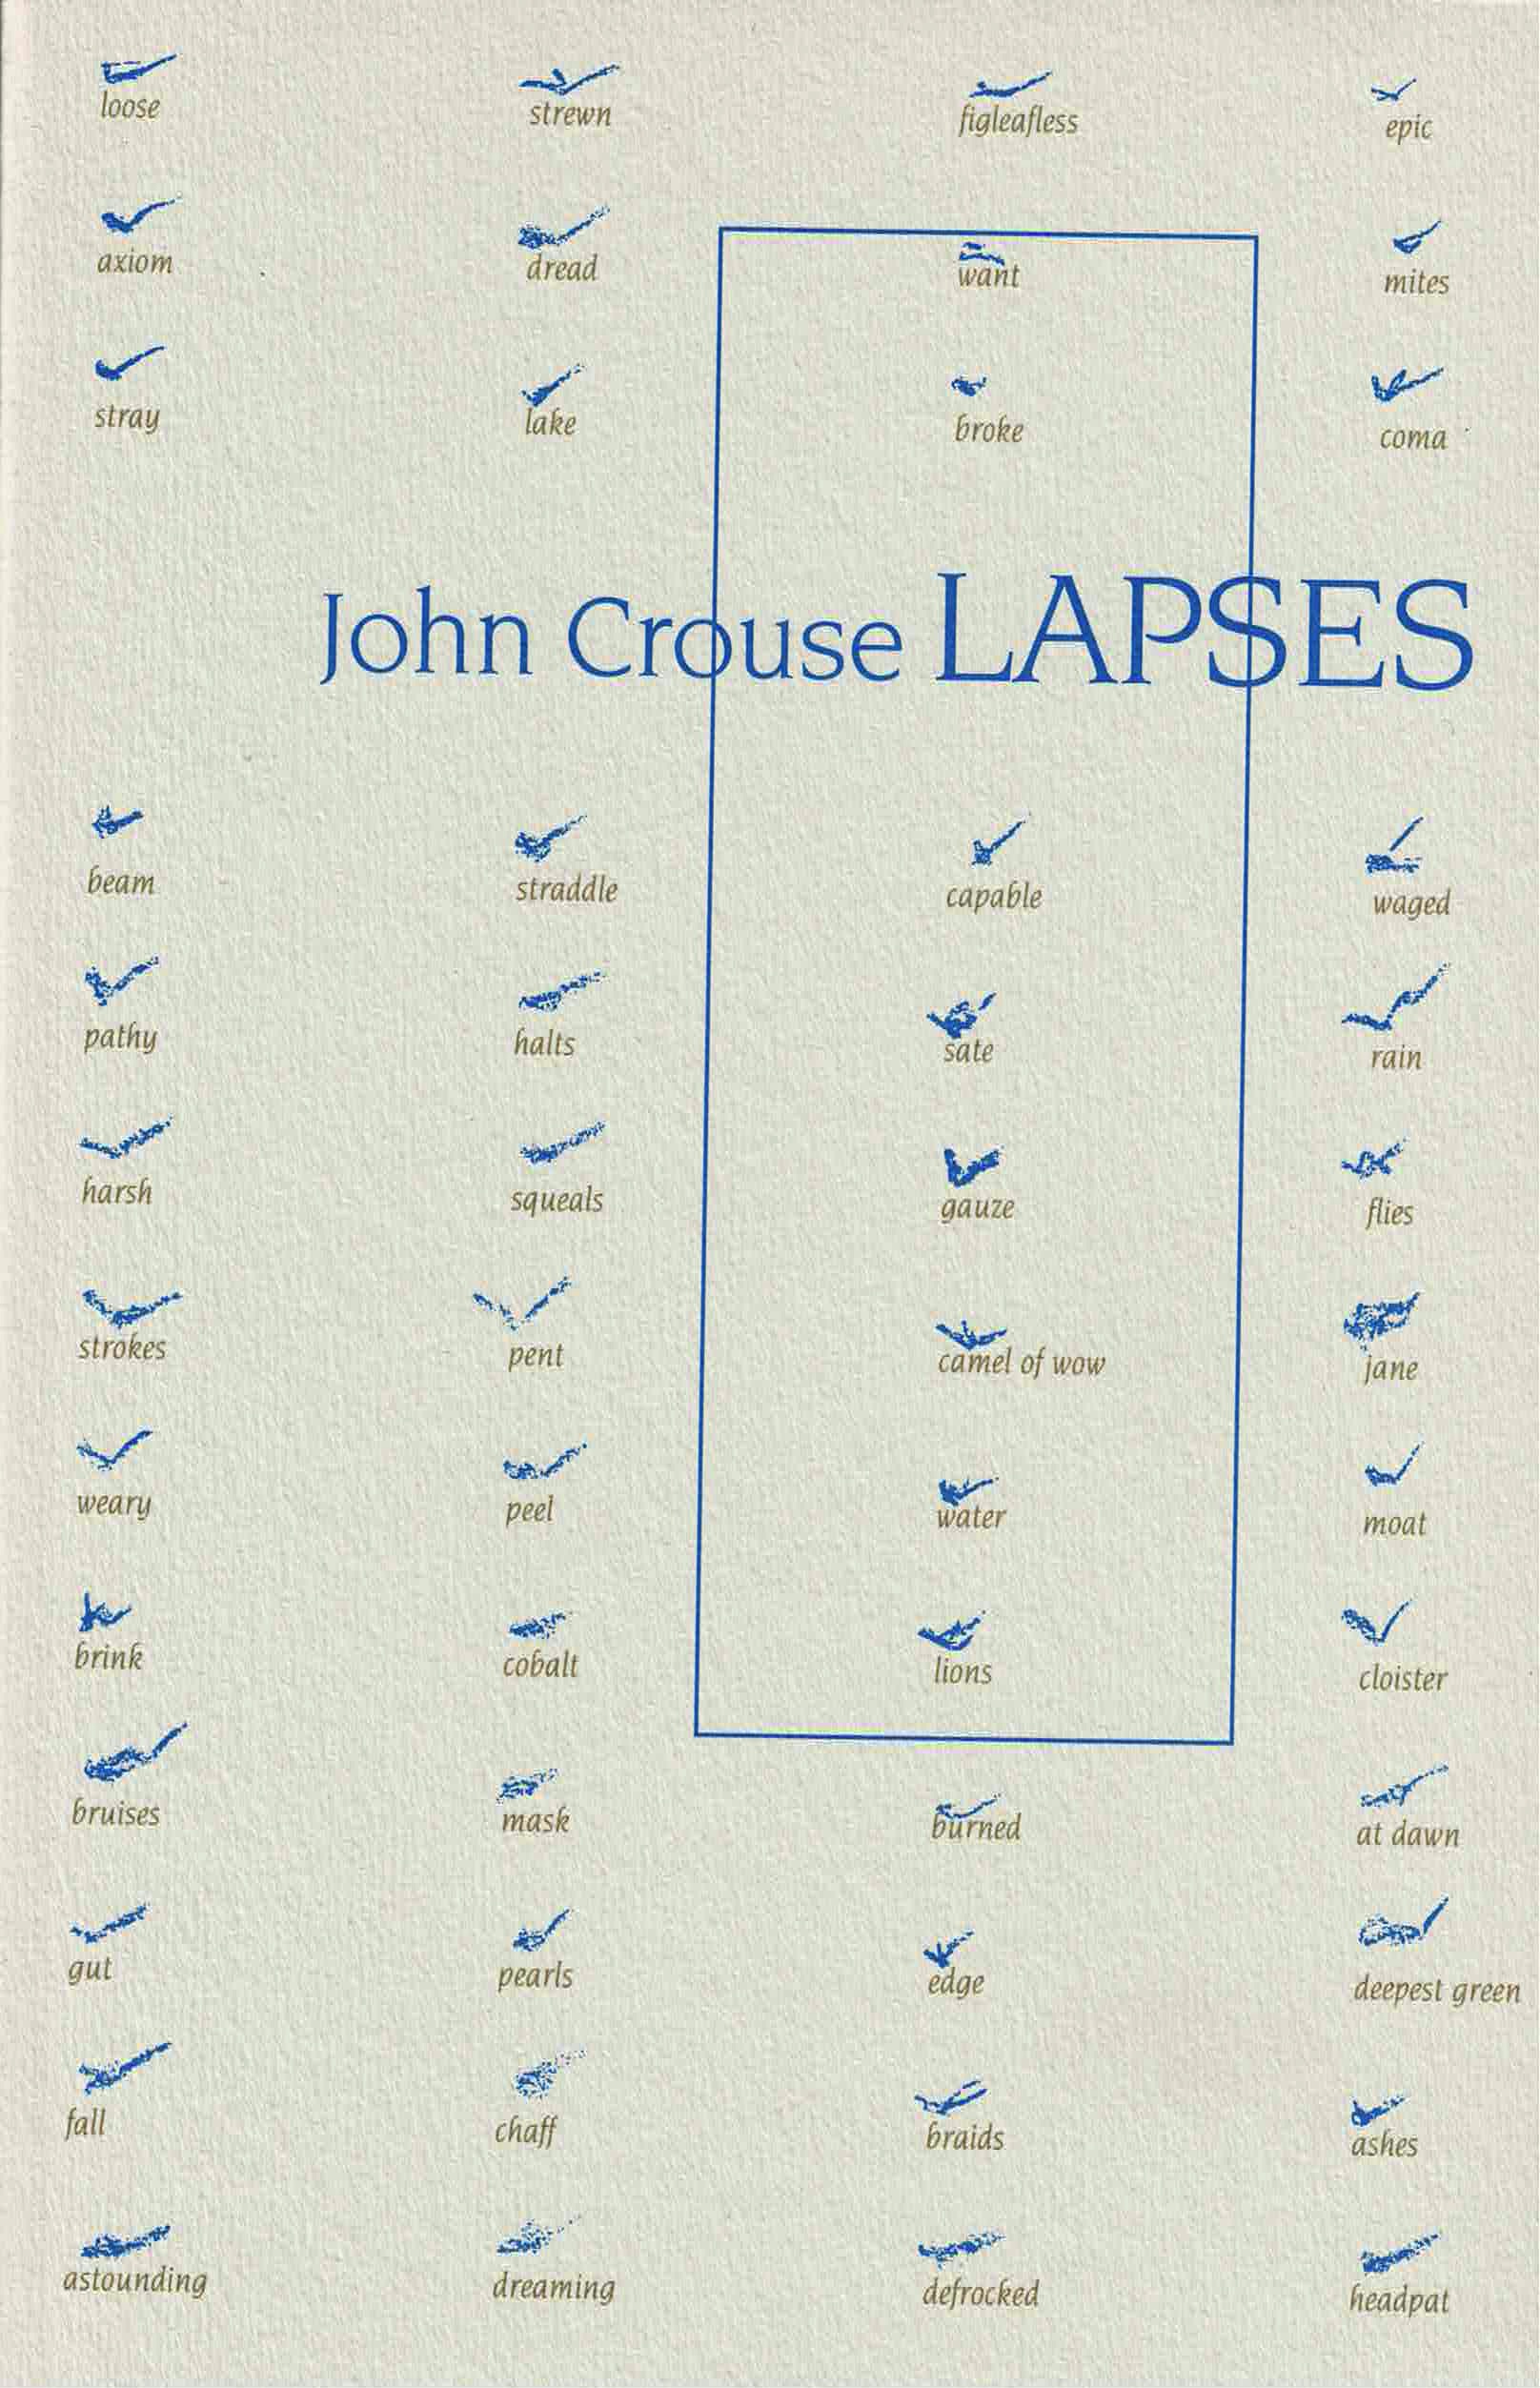 cover of Lapses by John Crouse; textured off-white background, four columns of nouns and verbs in light brown typed font with a blue textured check mark above each word, blue outline of rectangle surrounding eight words in third column from the left